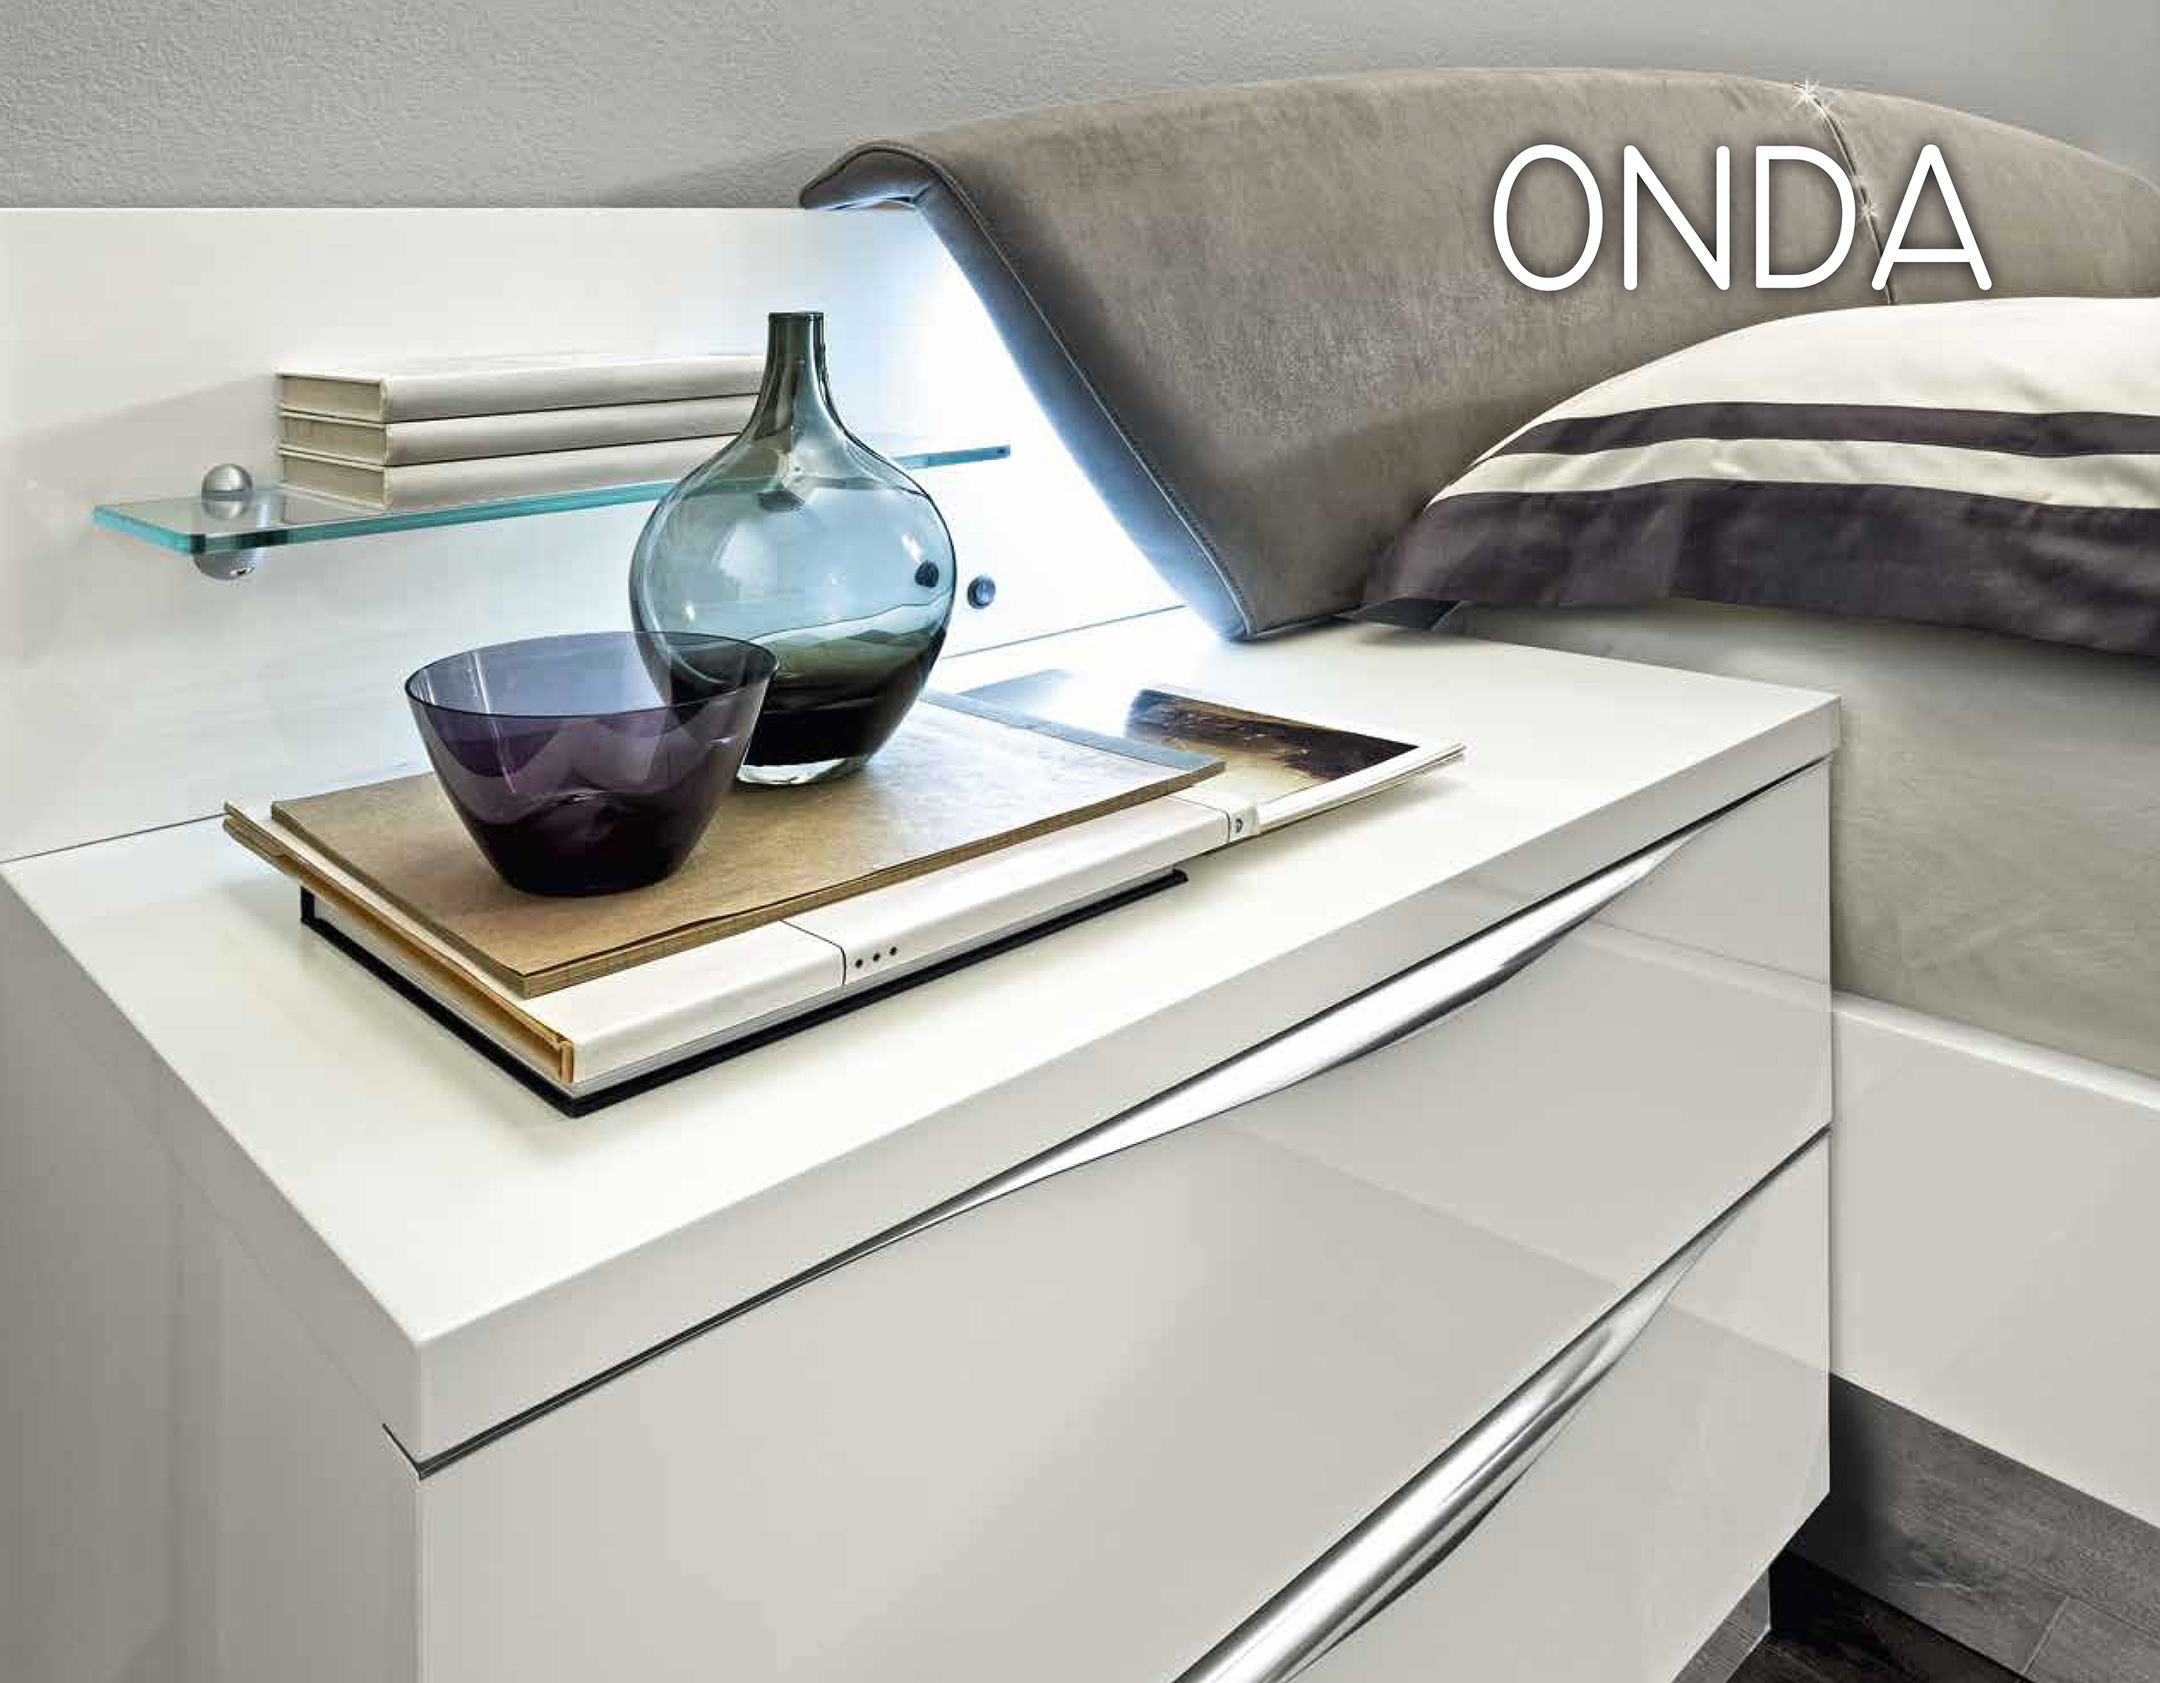 Bedroom Furniture Beds Onda White Additional Items